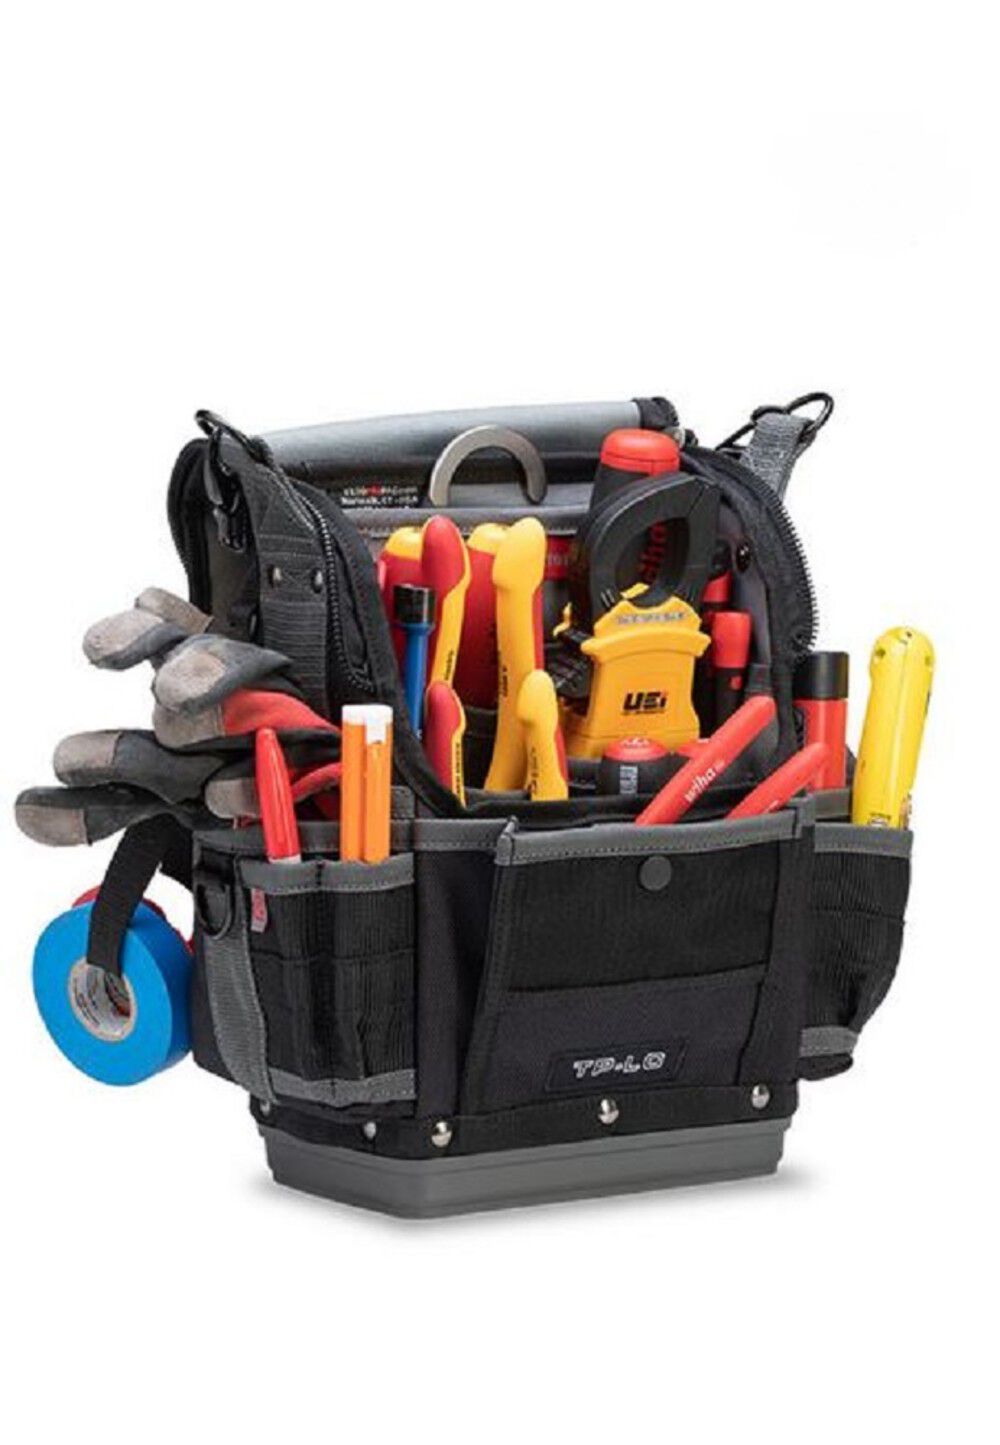 Veto Pro Pac Model LC Closed Top Tool Bag LC from Veto Pro Pac - Acme Tools